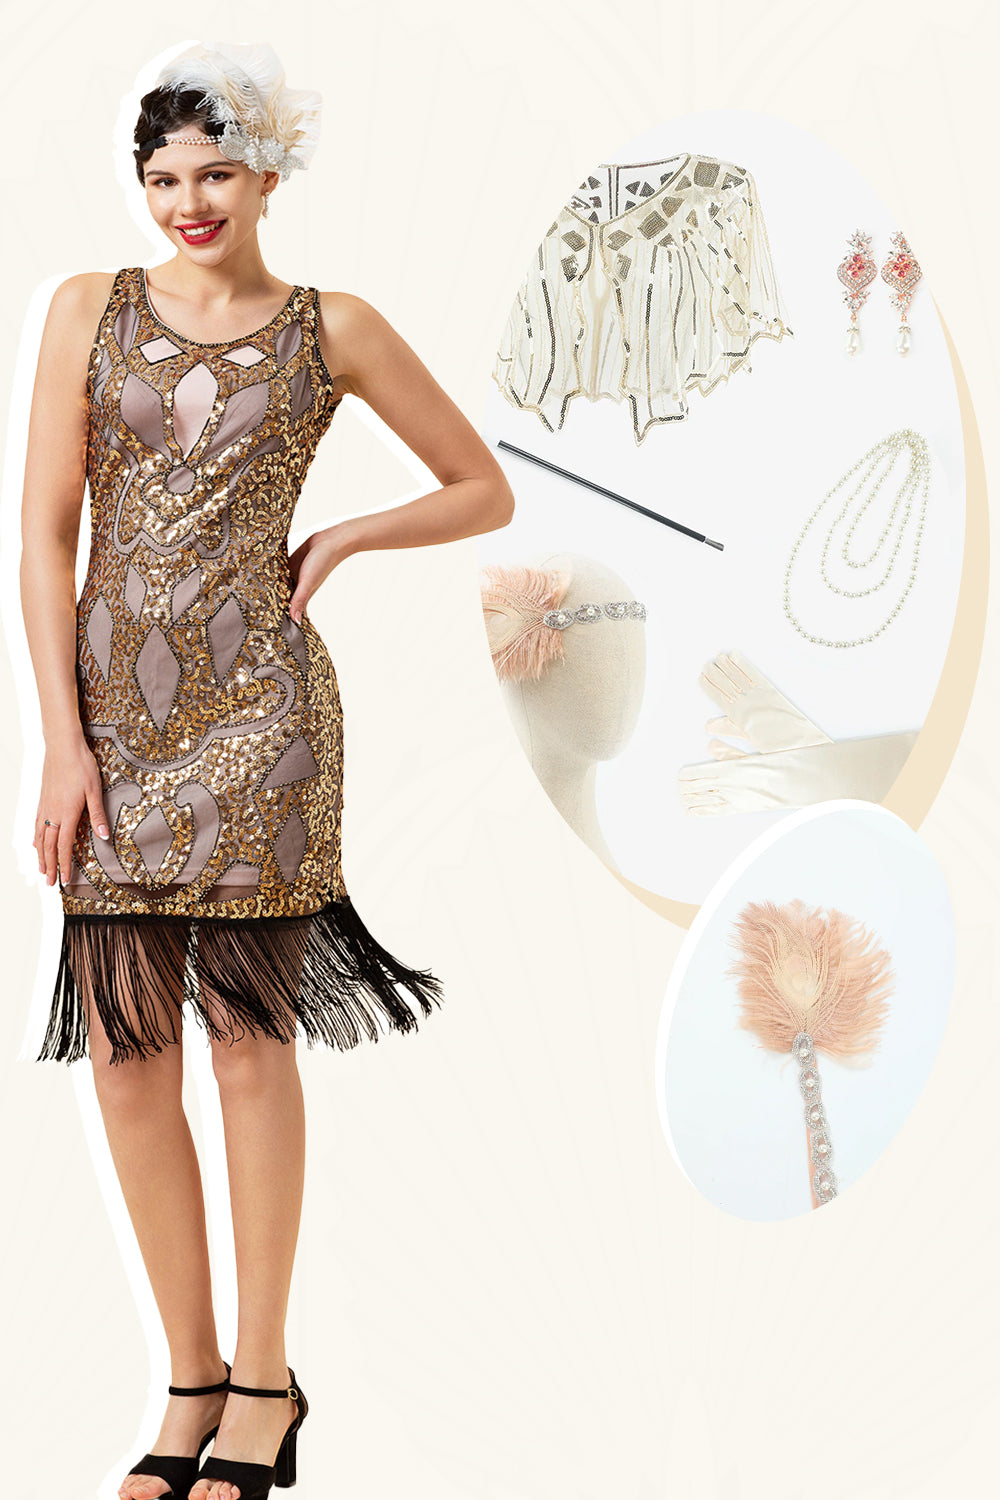 Zapaka Women Golden Sequined Fringes 1920s Flapper Dress with 20s